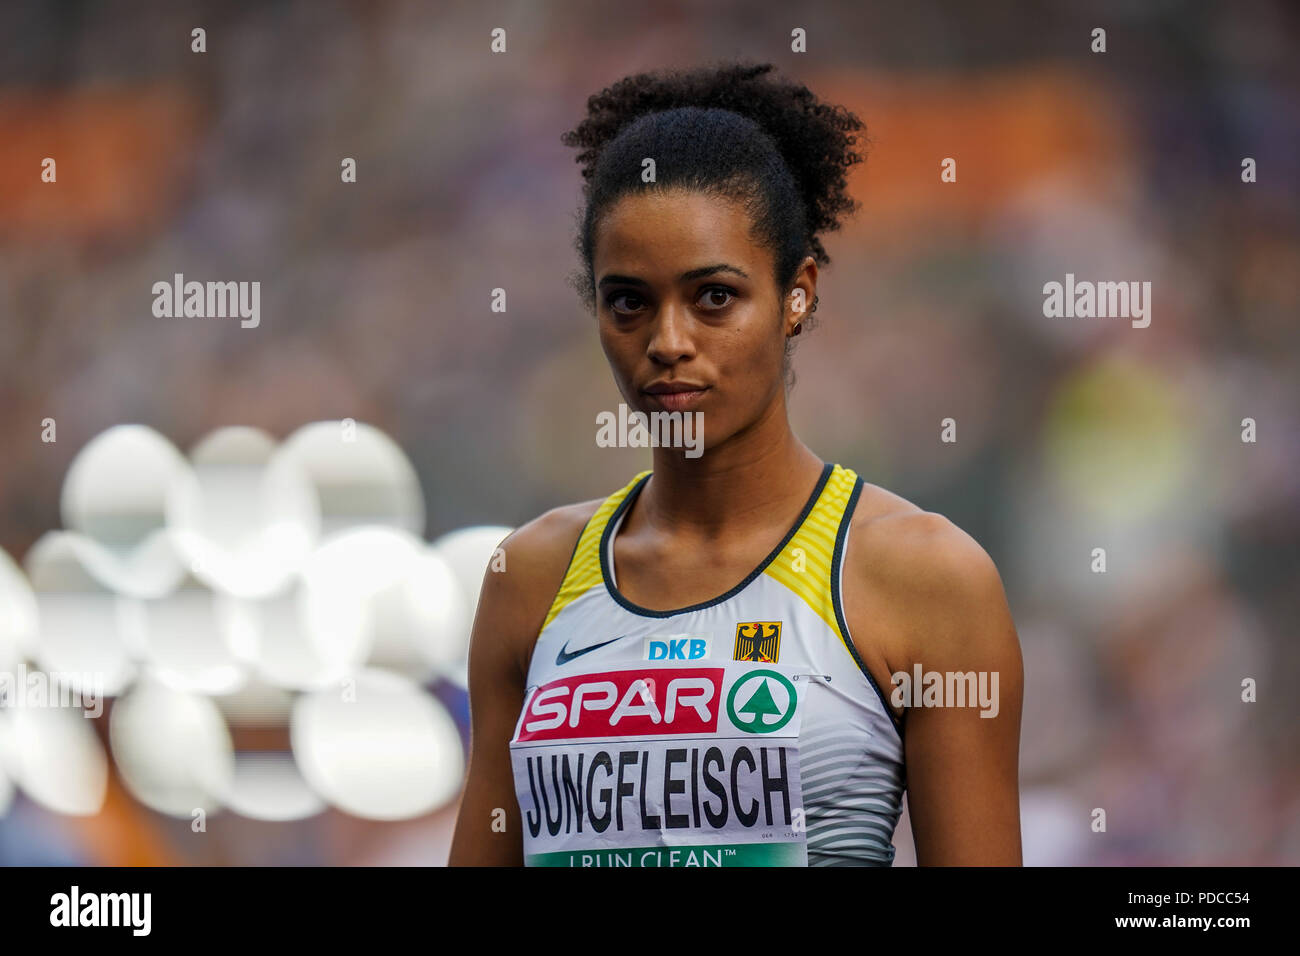 Berlin, Germany. August 8, 2018: Marie-Laurence Jungfleisch of Germany during High jump qualification for women at the Olympic Stadium in Berlin at the European Athletics Championship. Ulrik Pedersen/CSM Credit: Cal Sport Media/Alamy Live News Stock Photo